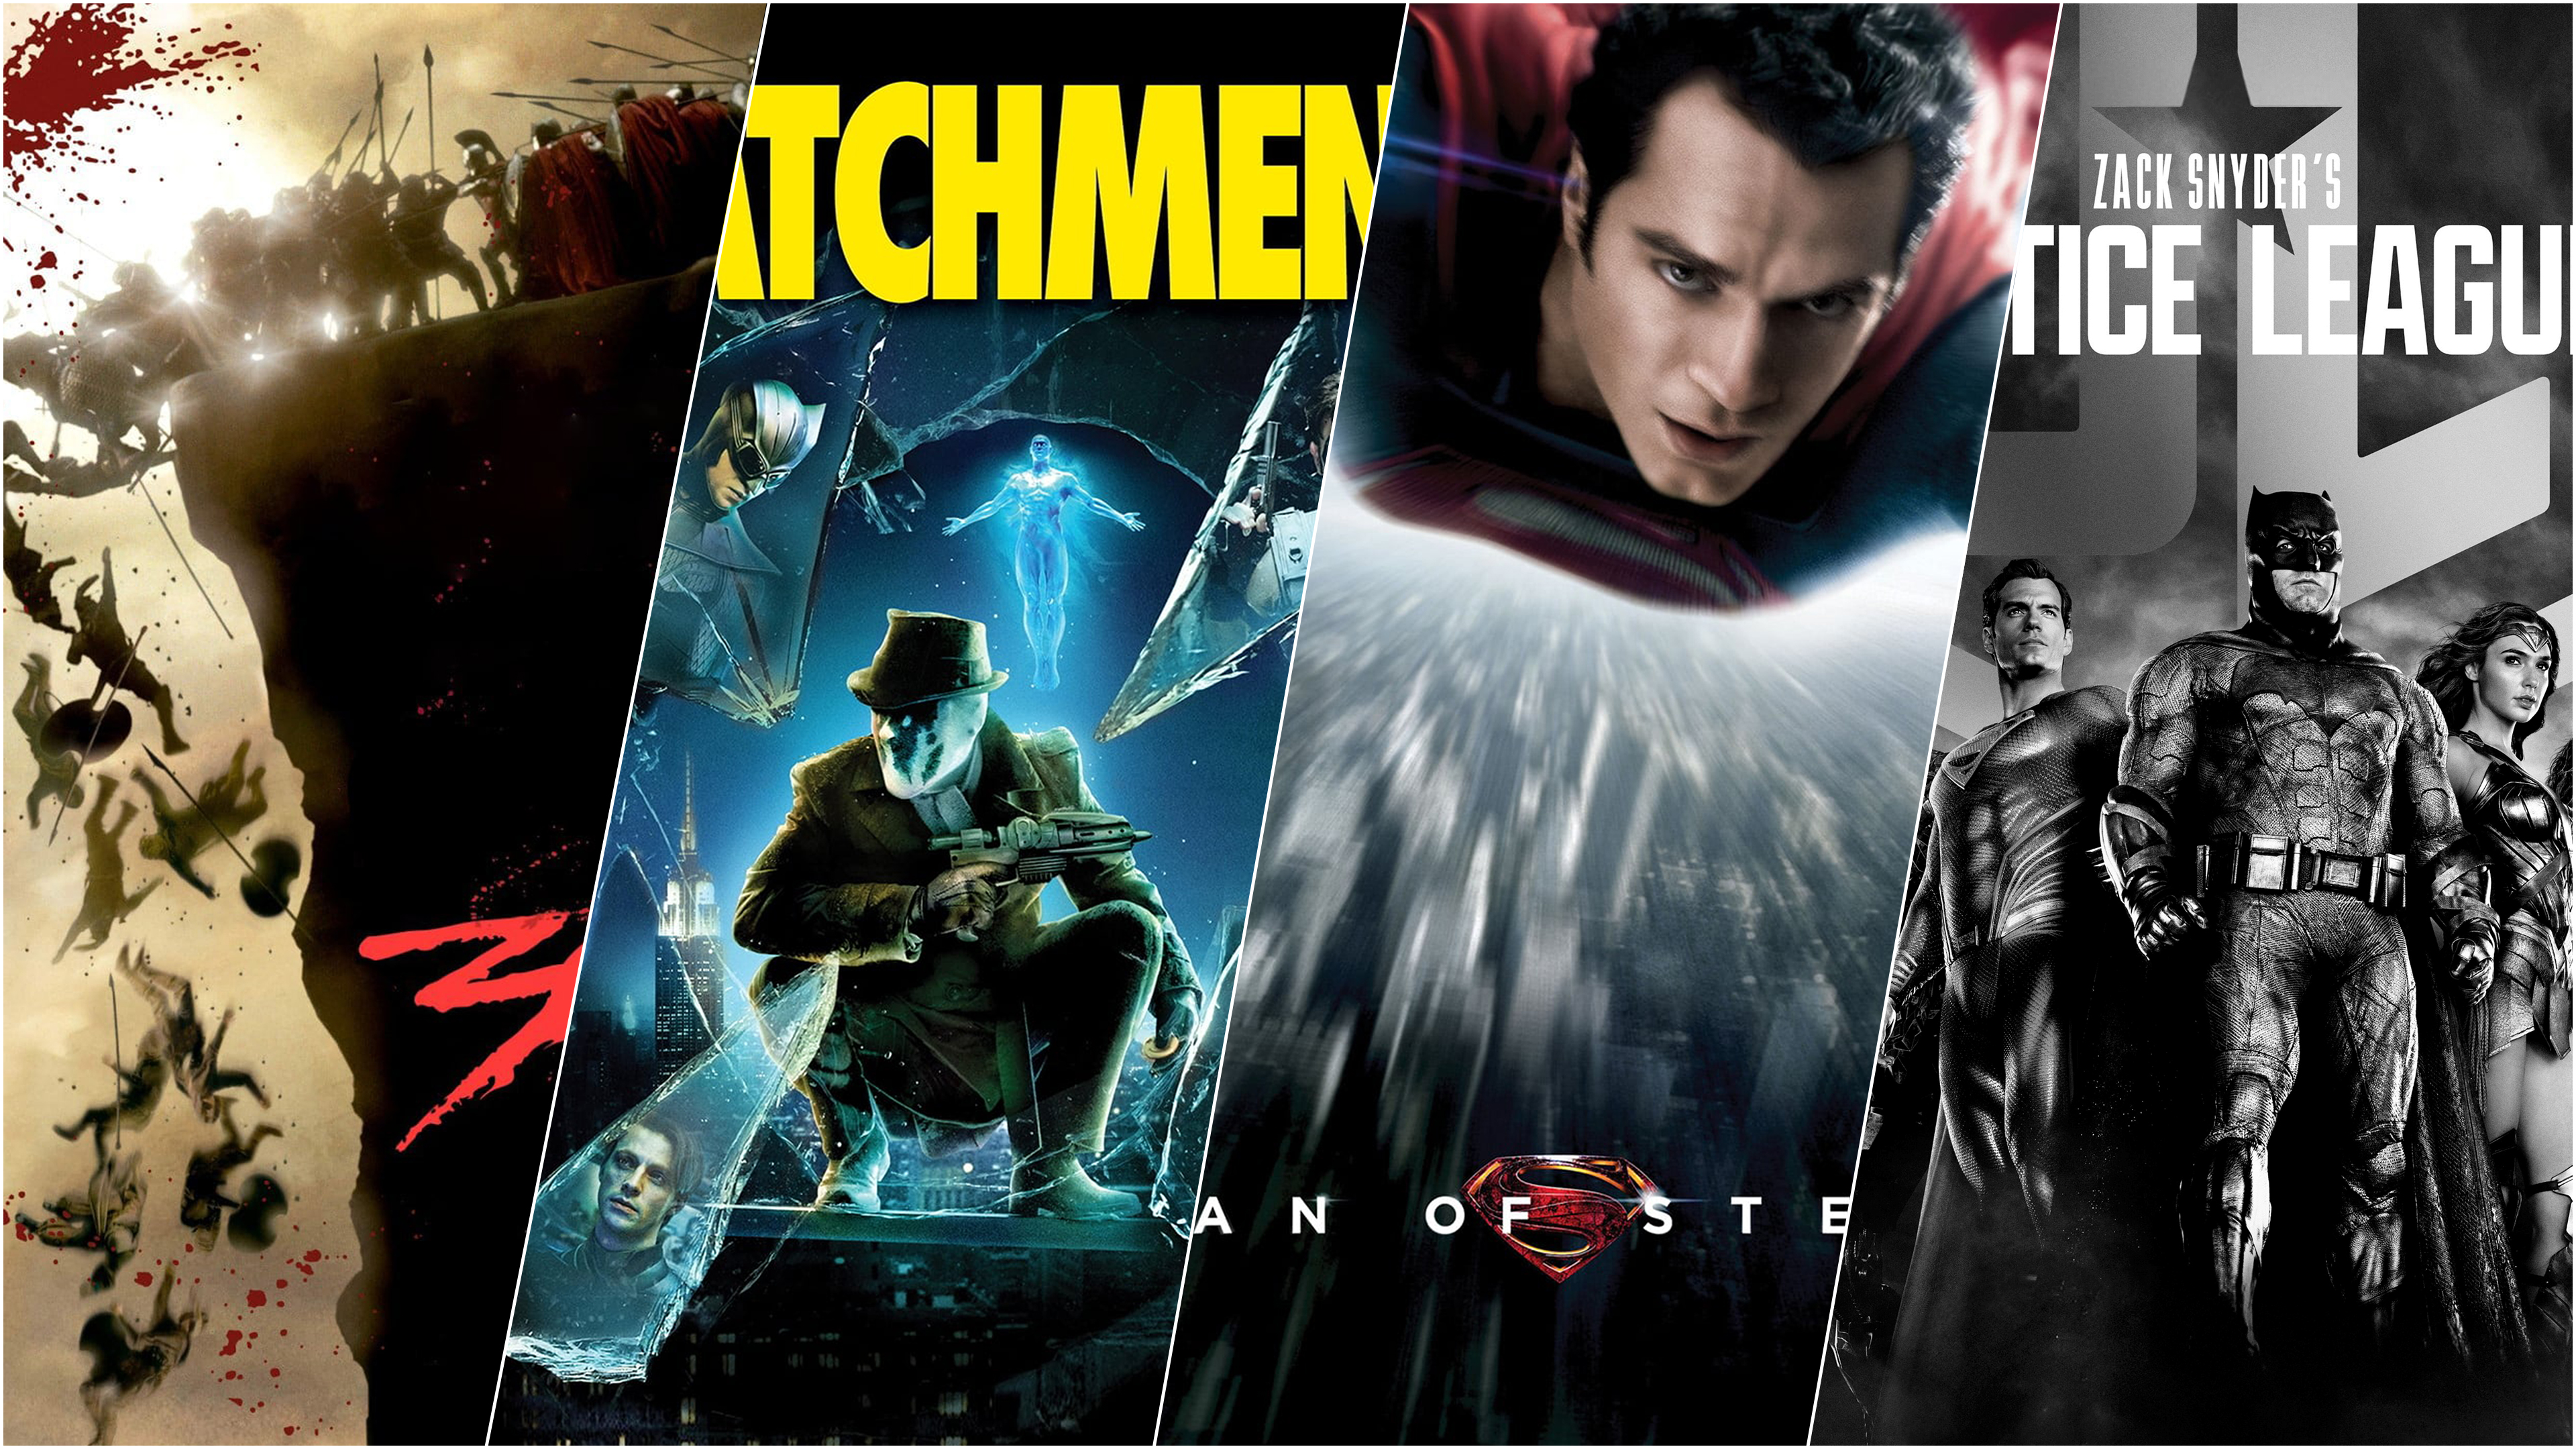 Movies - Top 3 Zack Snyder films | Sherdog Forums | UFC, MMA &amp; Boxing  Discussion